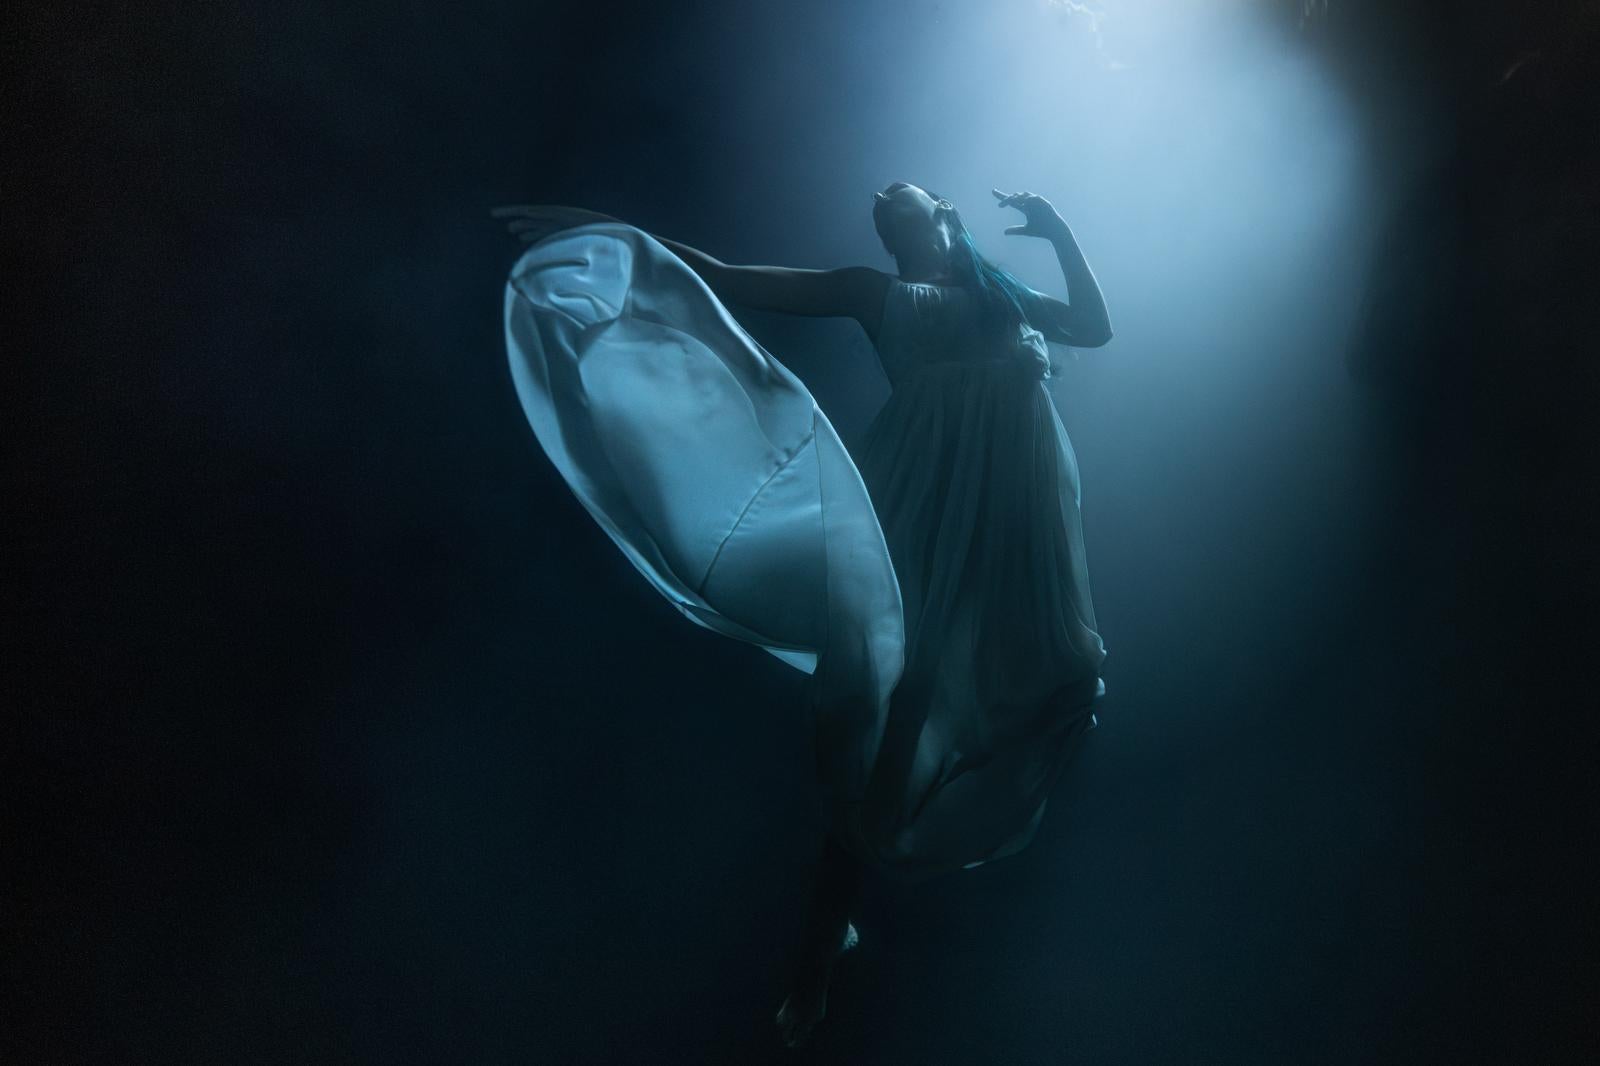 Vanessa into the Blue- Fine art print, Color underwater photography with a model - Black Figurative Photograph by Olivier Borde